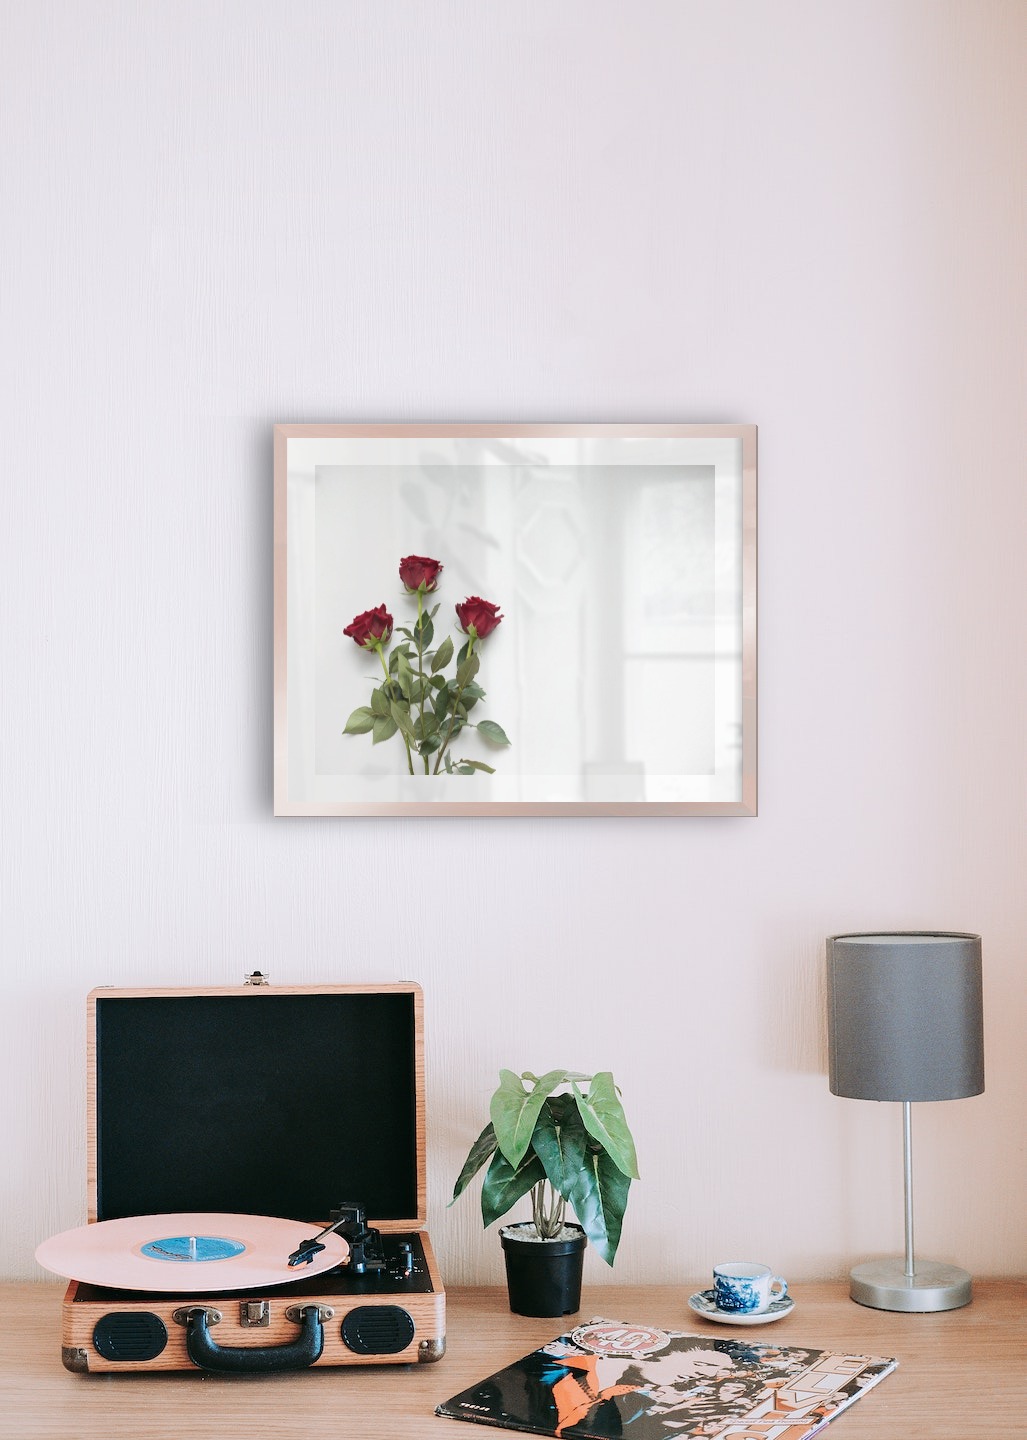 Gallery wall with picture frame in copper in size 40x50 with print "Red roses"